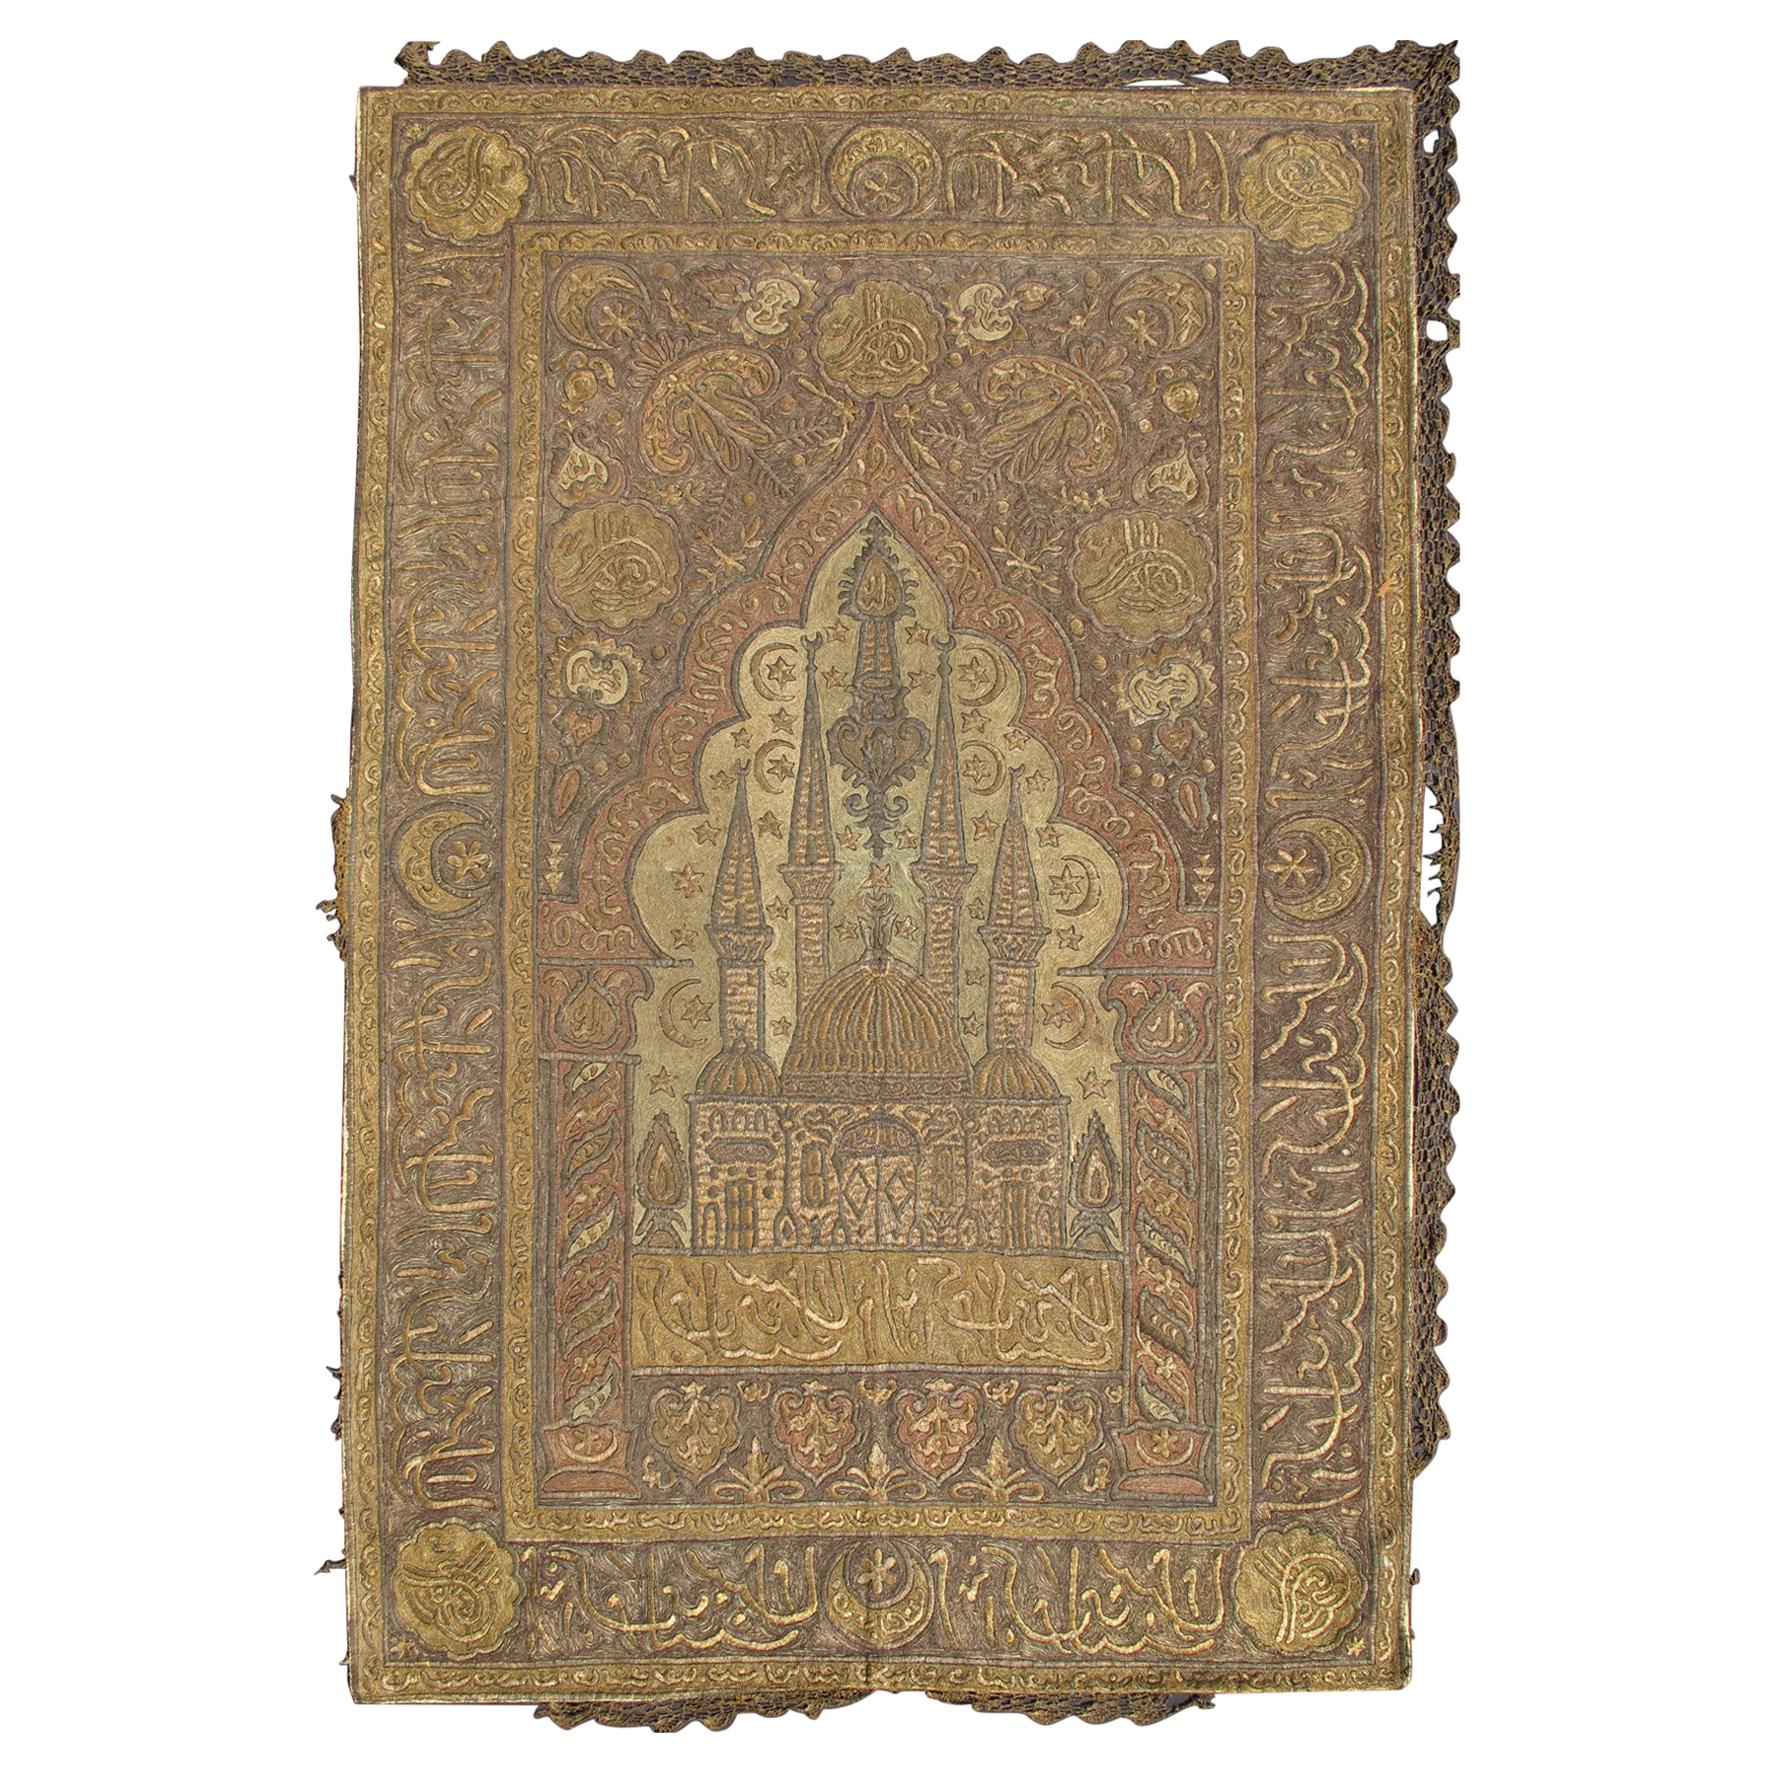 Late 18th Century Ottoman Era Prayer Rug in Gold and Metal